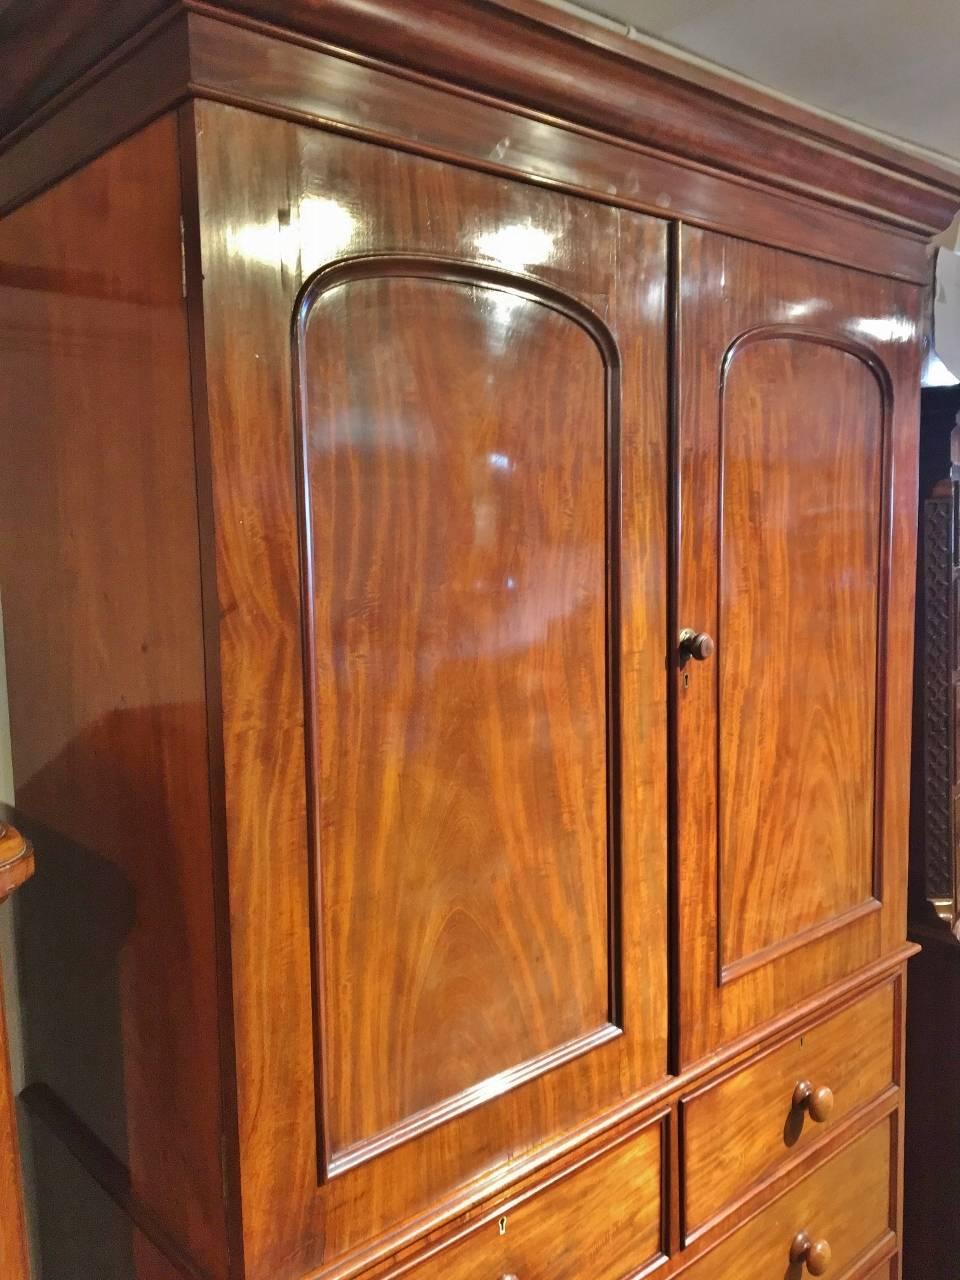 Fine quality mid-19th century mahogany linen press, English, circa 1860.

This delightful linen press, well maintained by former owners is shown here in excellent condition, having been lightly refurbished and wax polished to show its beautiful